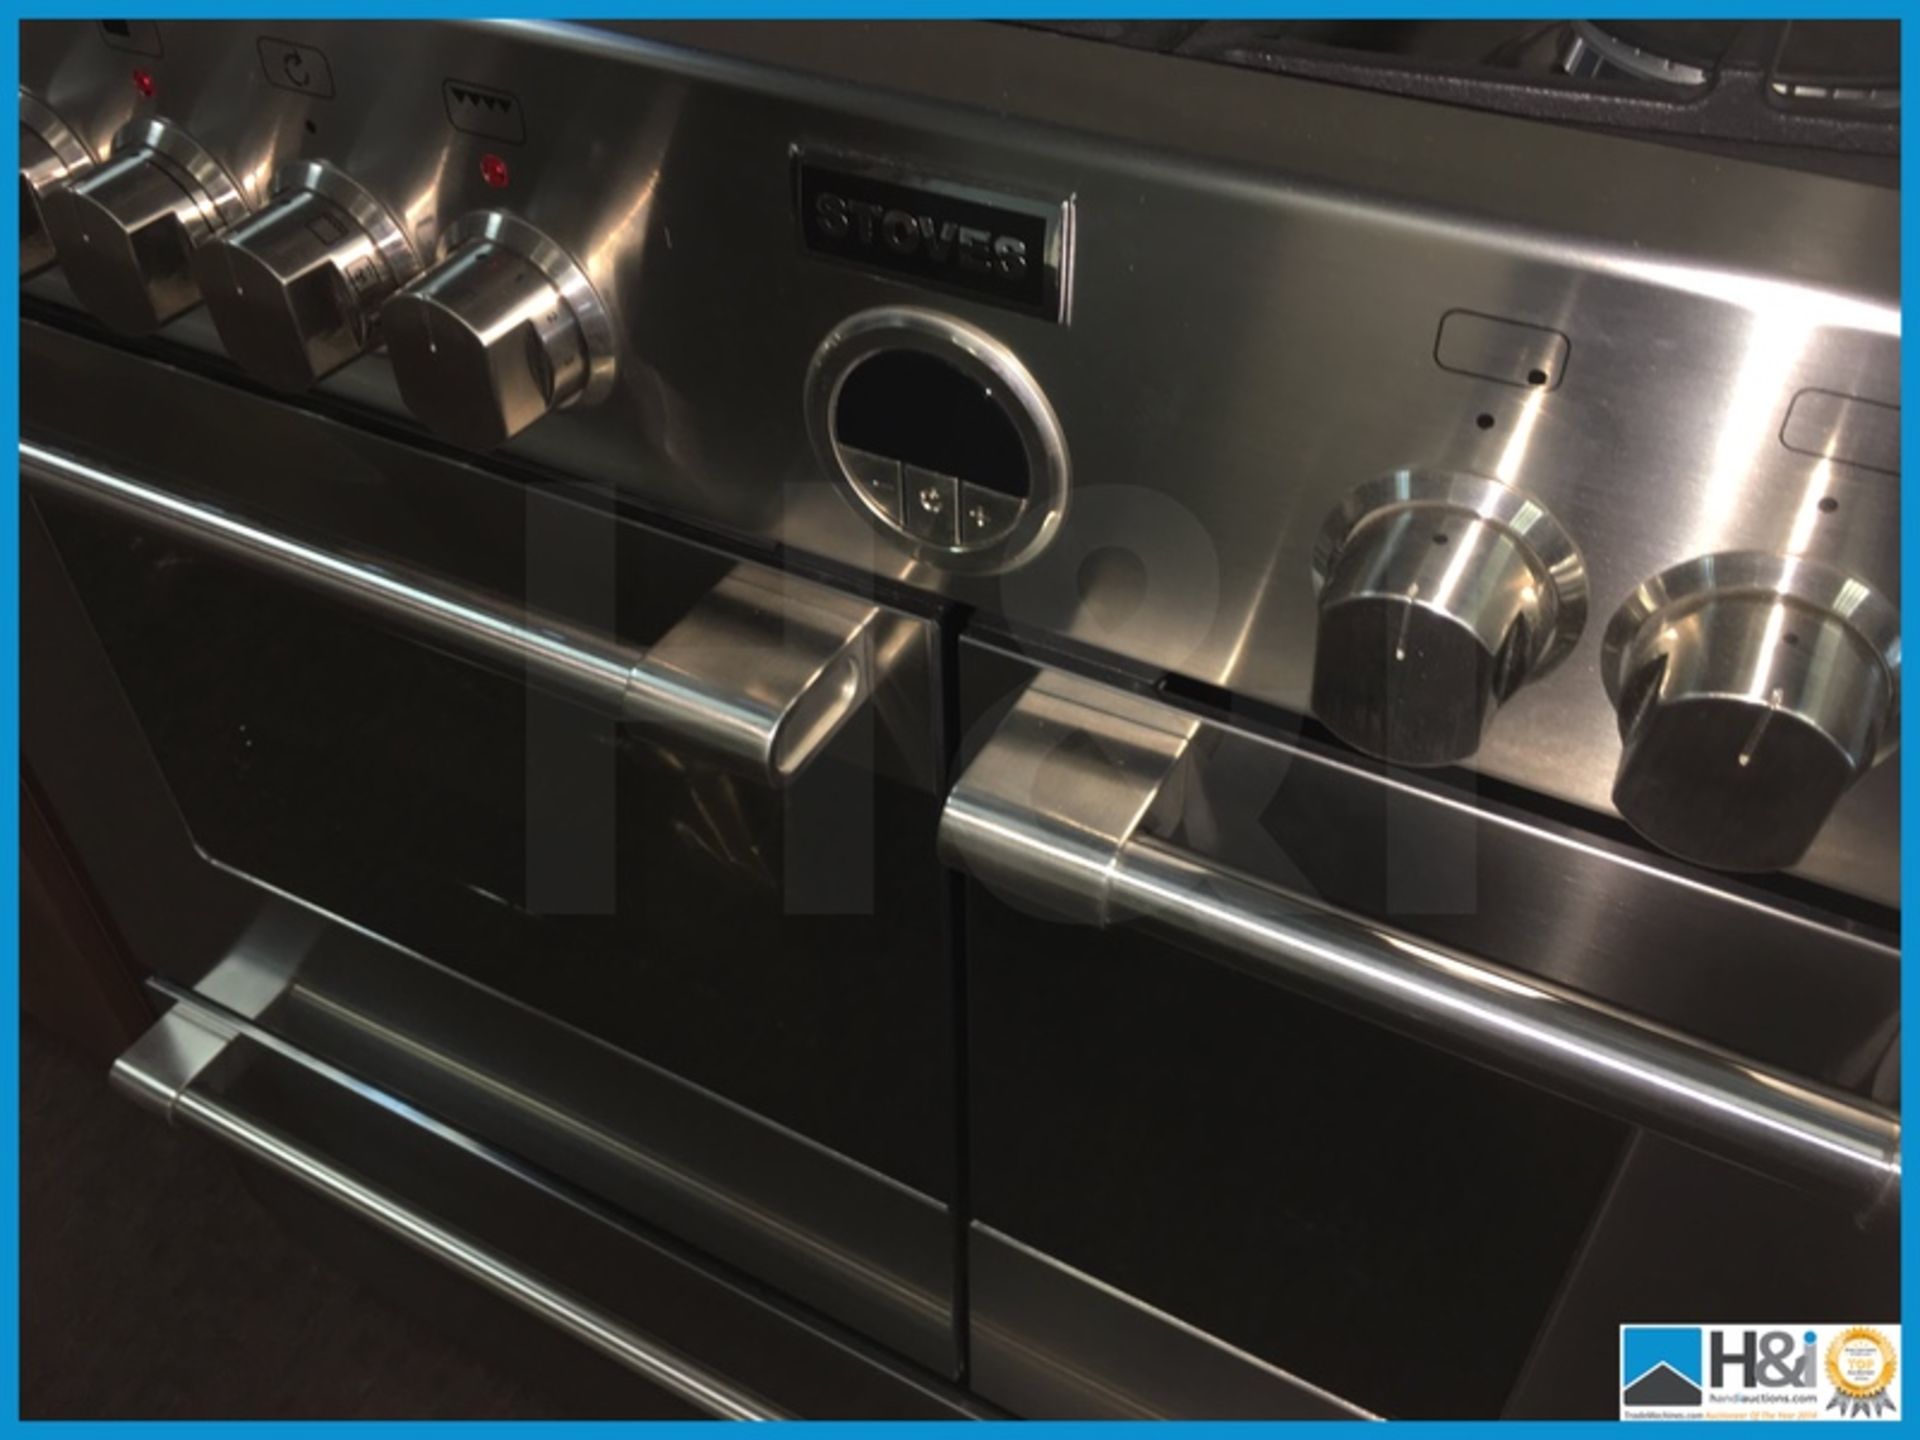 Stoves stainless steel double oven 800 wide with 5 gas burners and lower pan storage. Also - Image 3 of 7